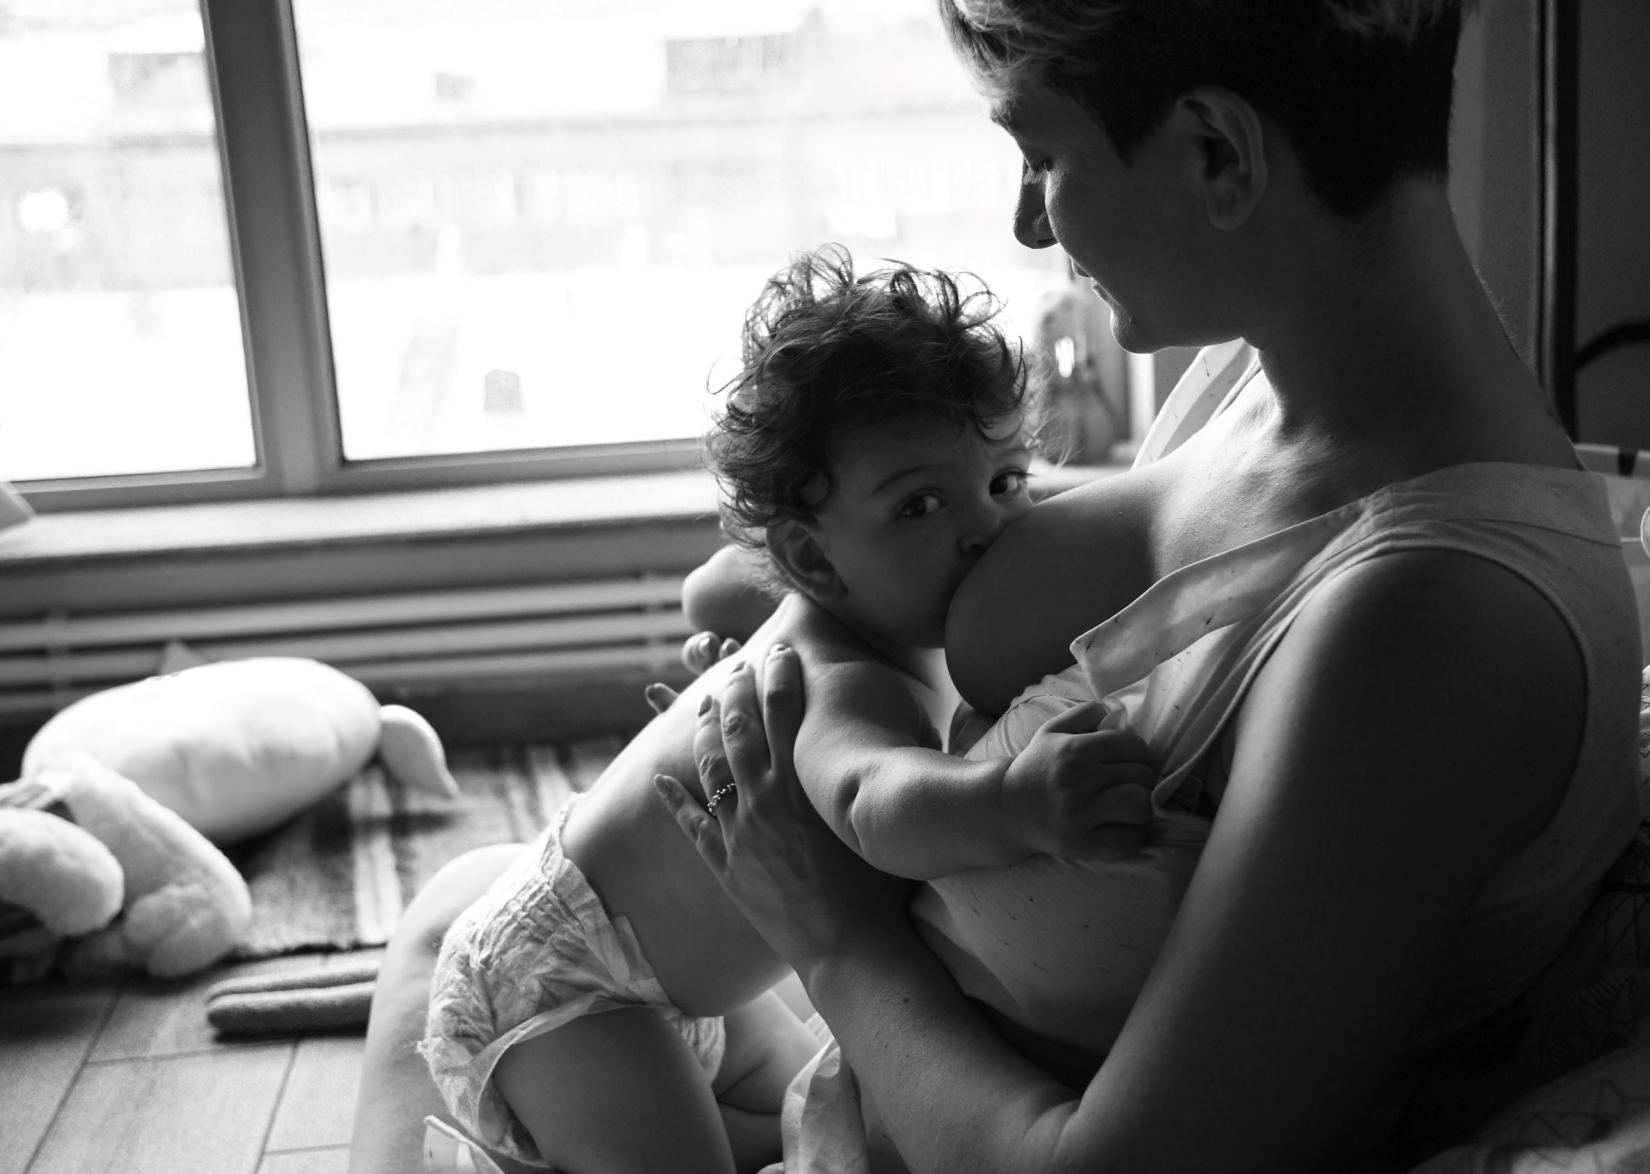 Woman breastfeeds a baby